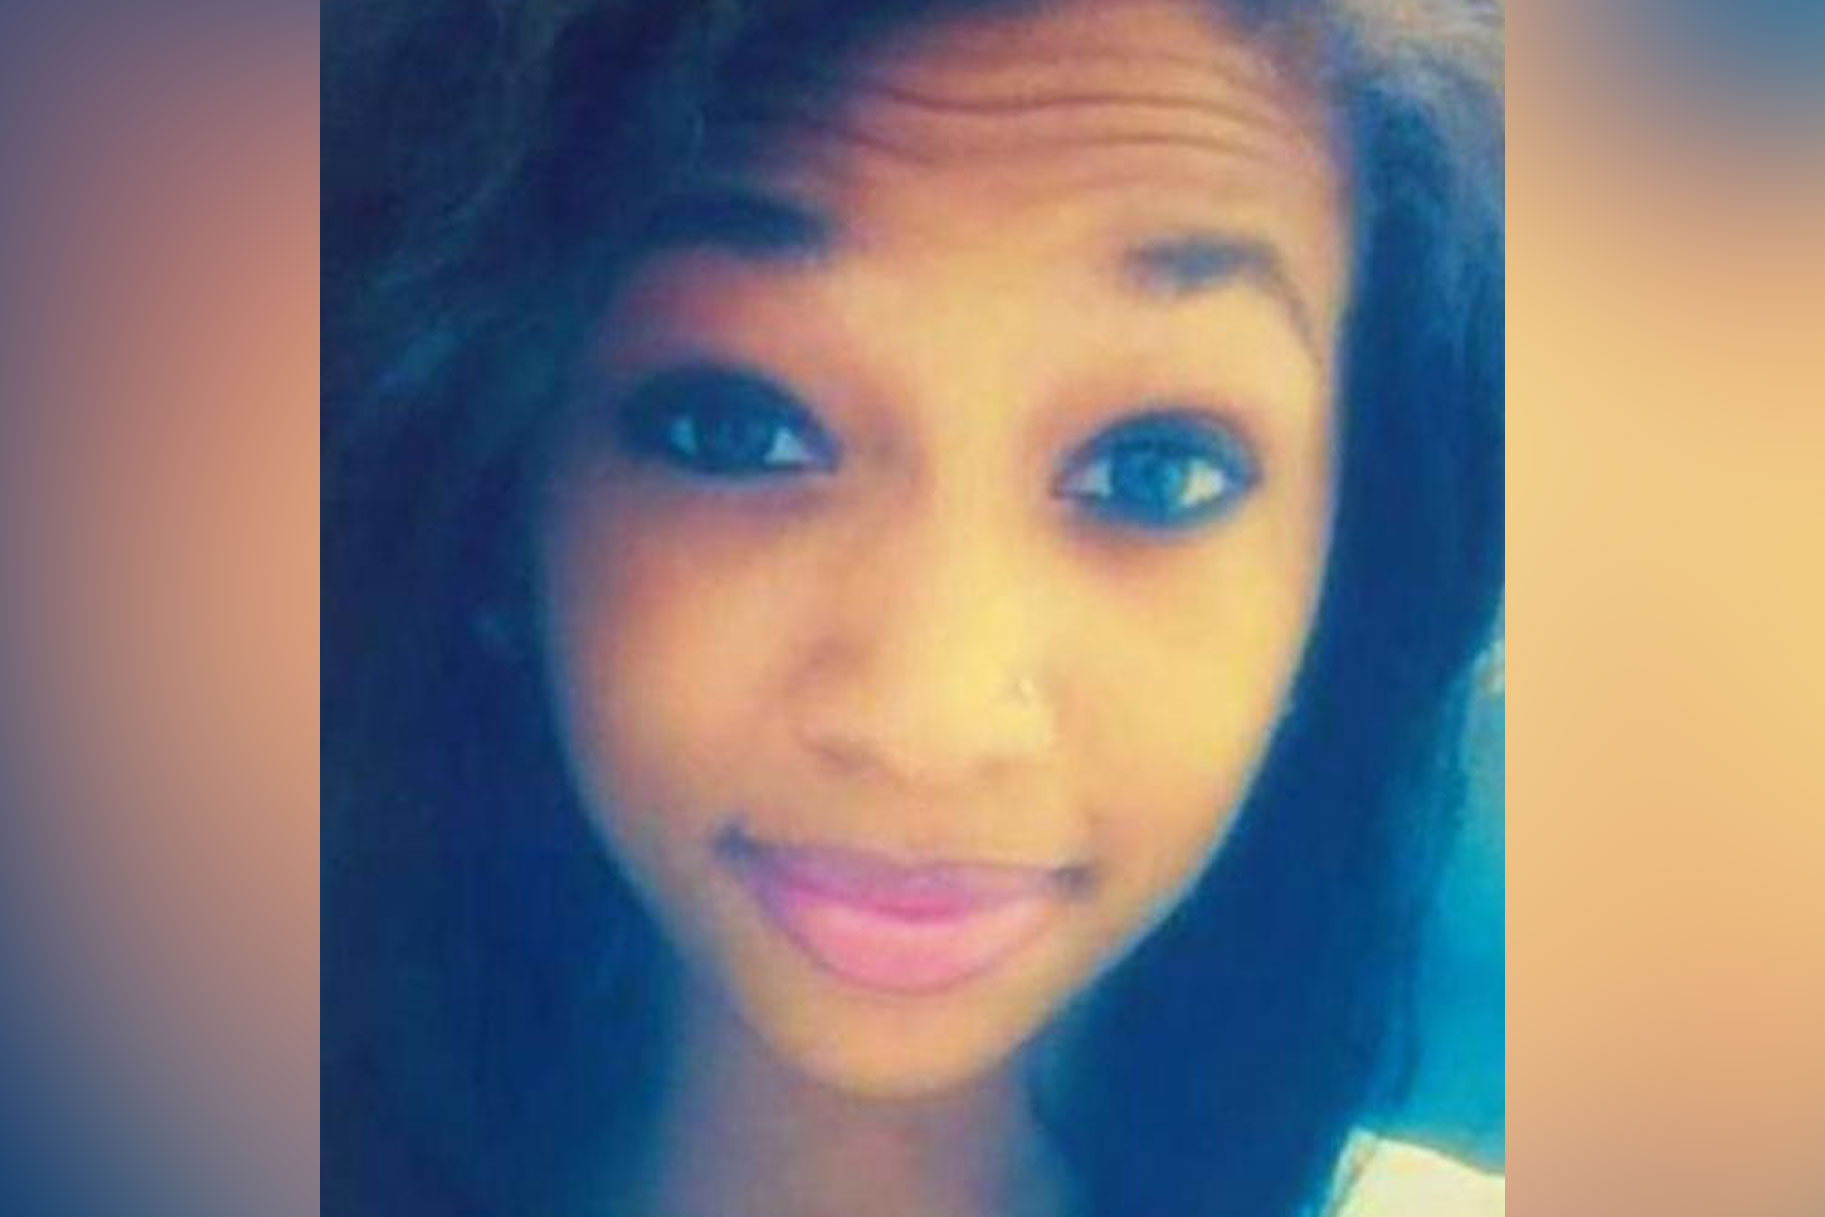 The remains of 17-year-old Alexis Murphy, who vanished from a Virginia gas ...